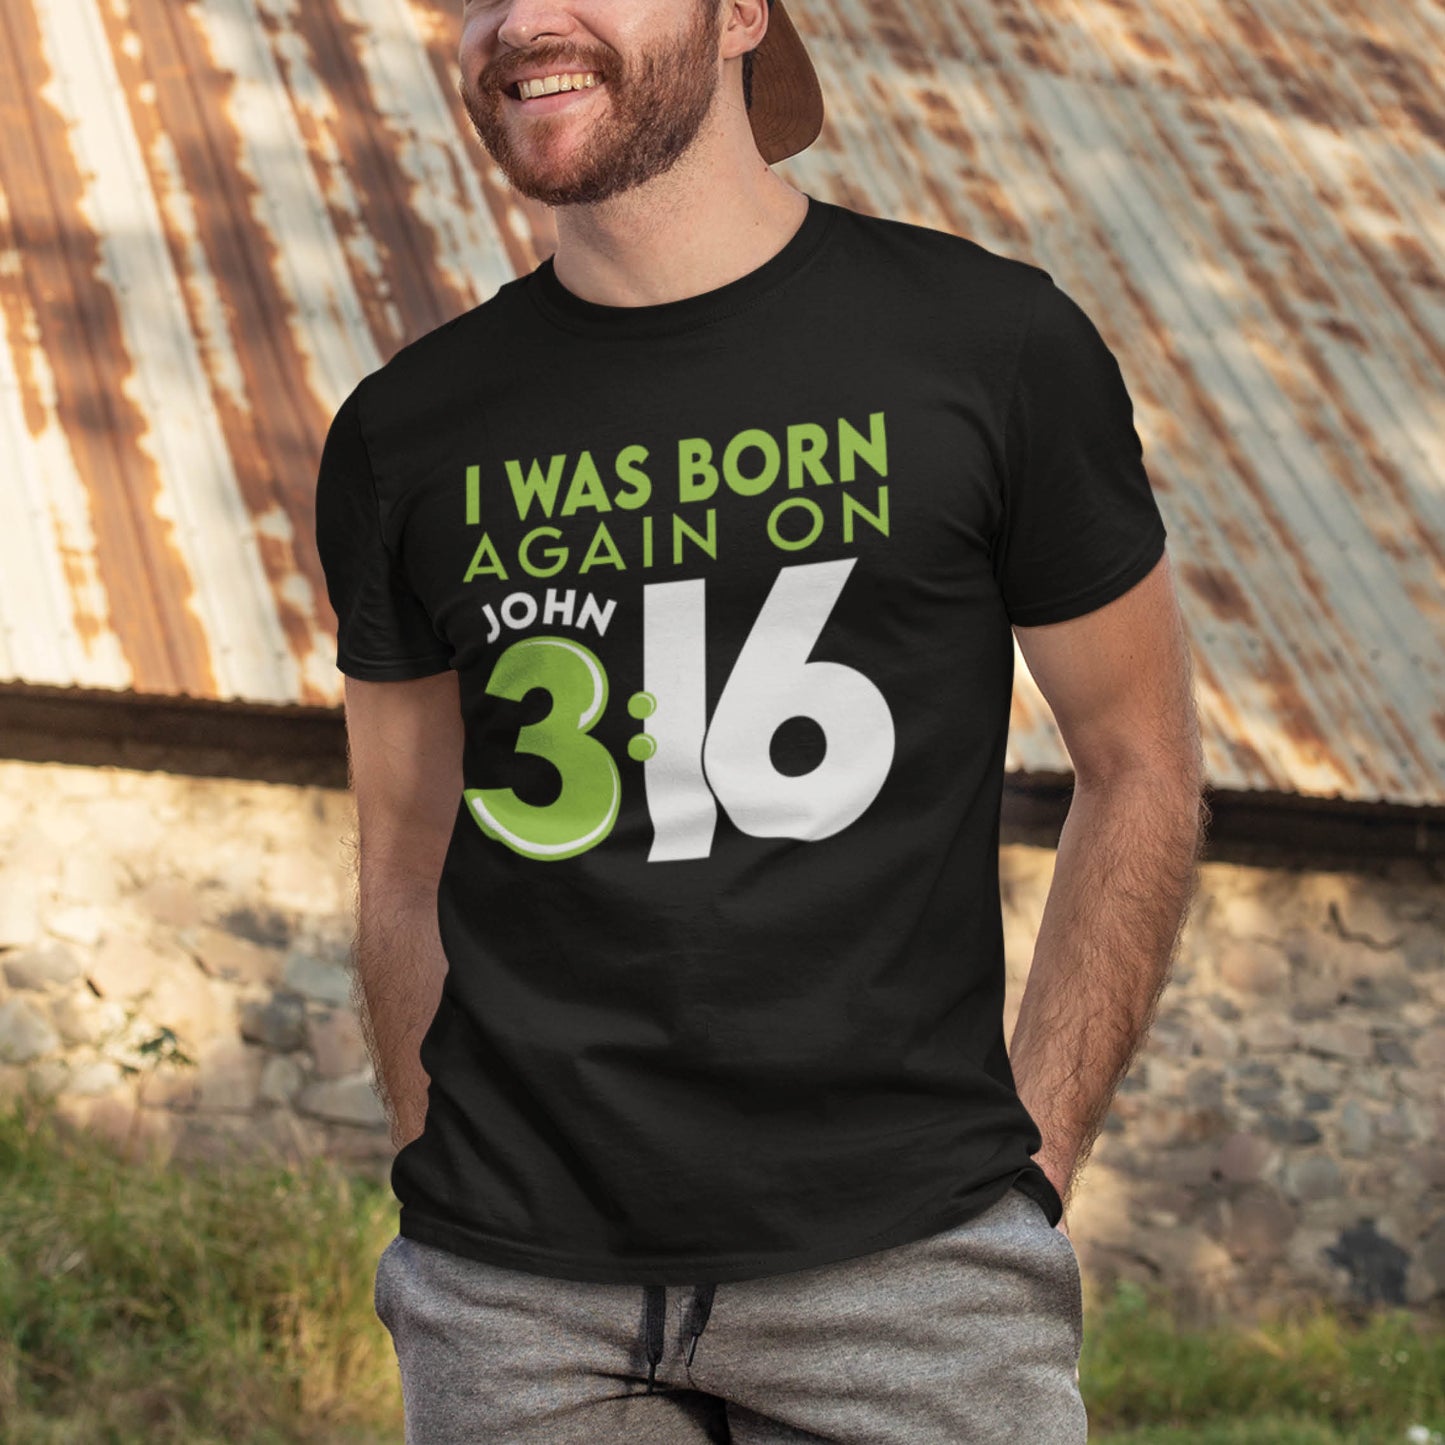 Trendy young bearded man wearing a Black Christian aesthetic unisex t-shirt with a play on words that says, I Was Born Again on John 3:16, bible verse scripture quote in lime green and white, designed for men and women